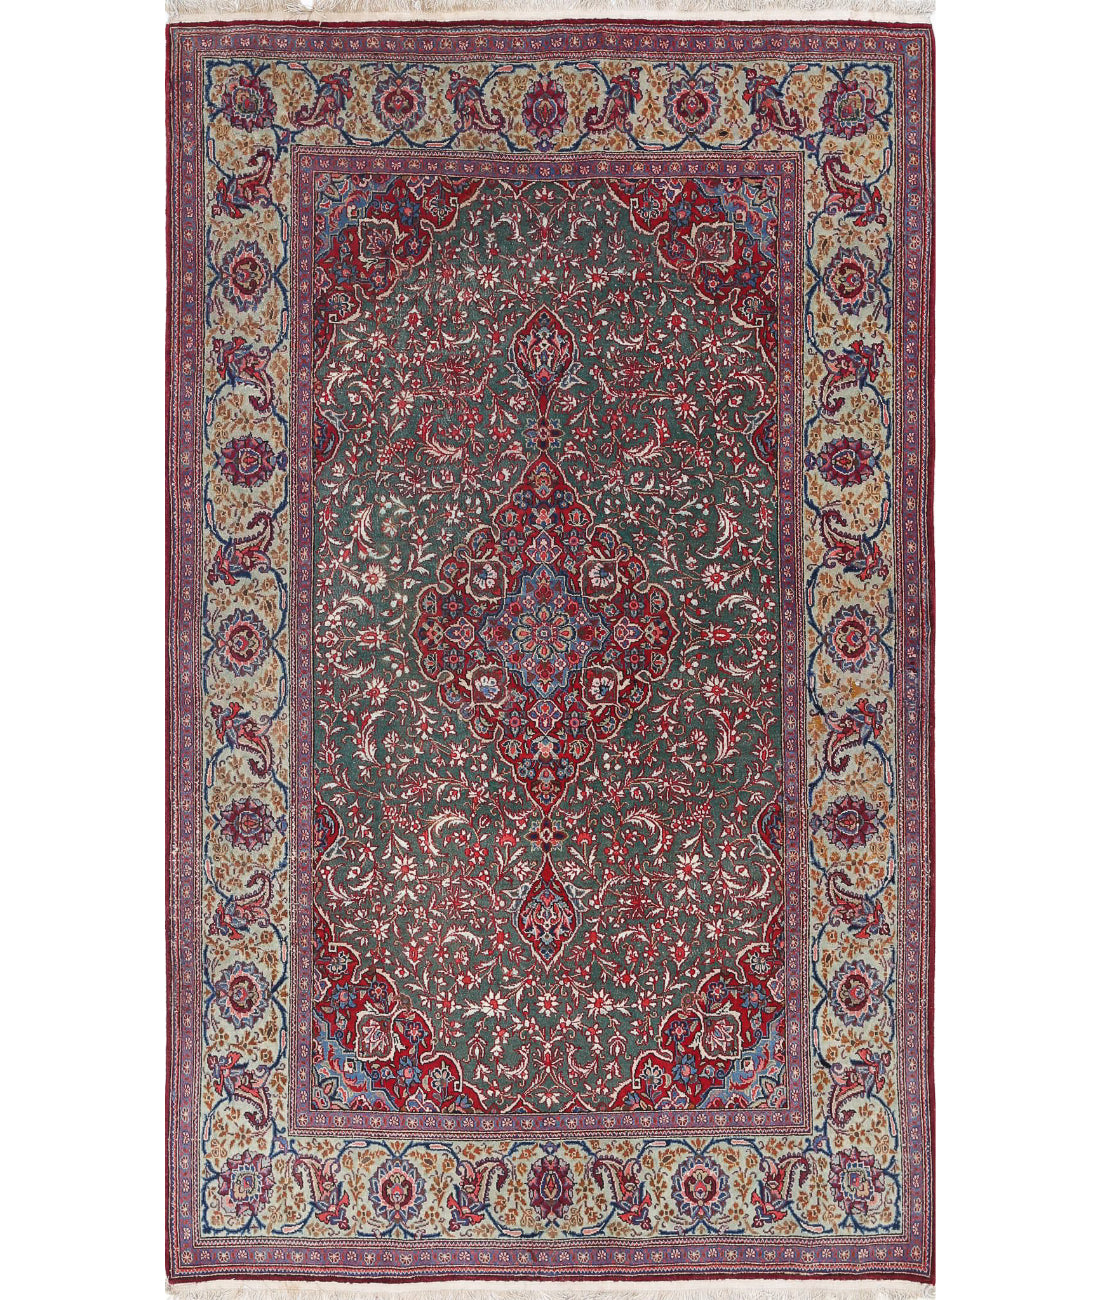 Hand Knotted Antique Persian Kashan Fine Wool & Silk Rug - 4'1'' x 6'9'' 4'1'' x 6'9'' (123 X 203) / Green / Multi